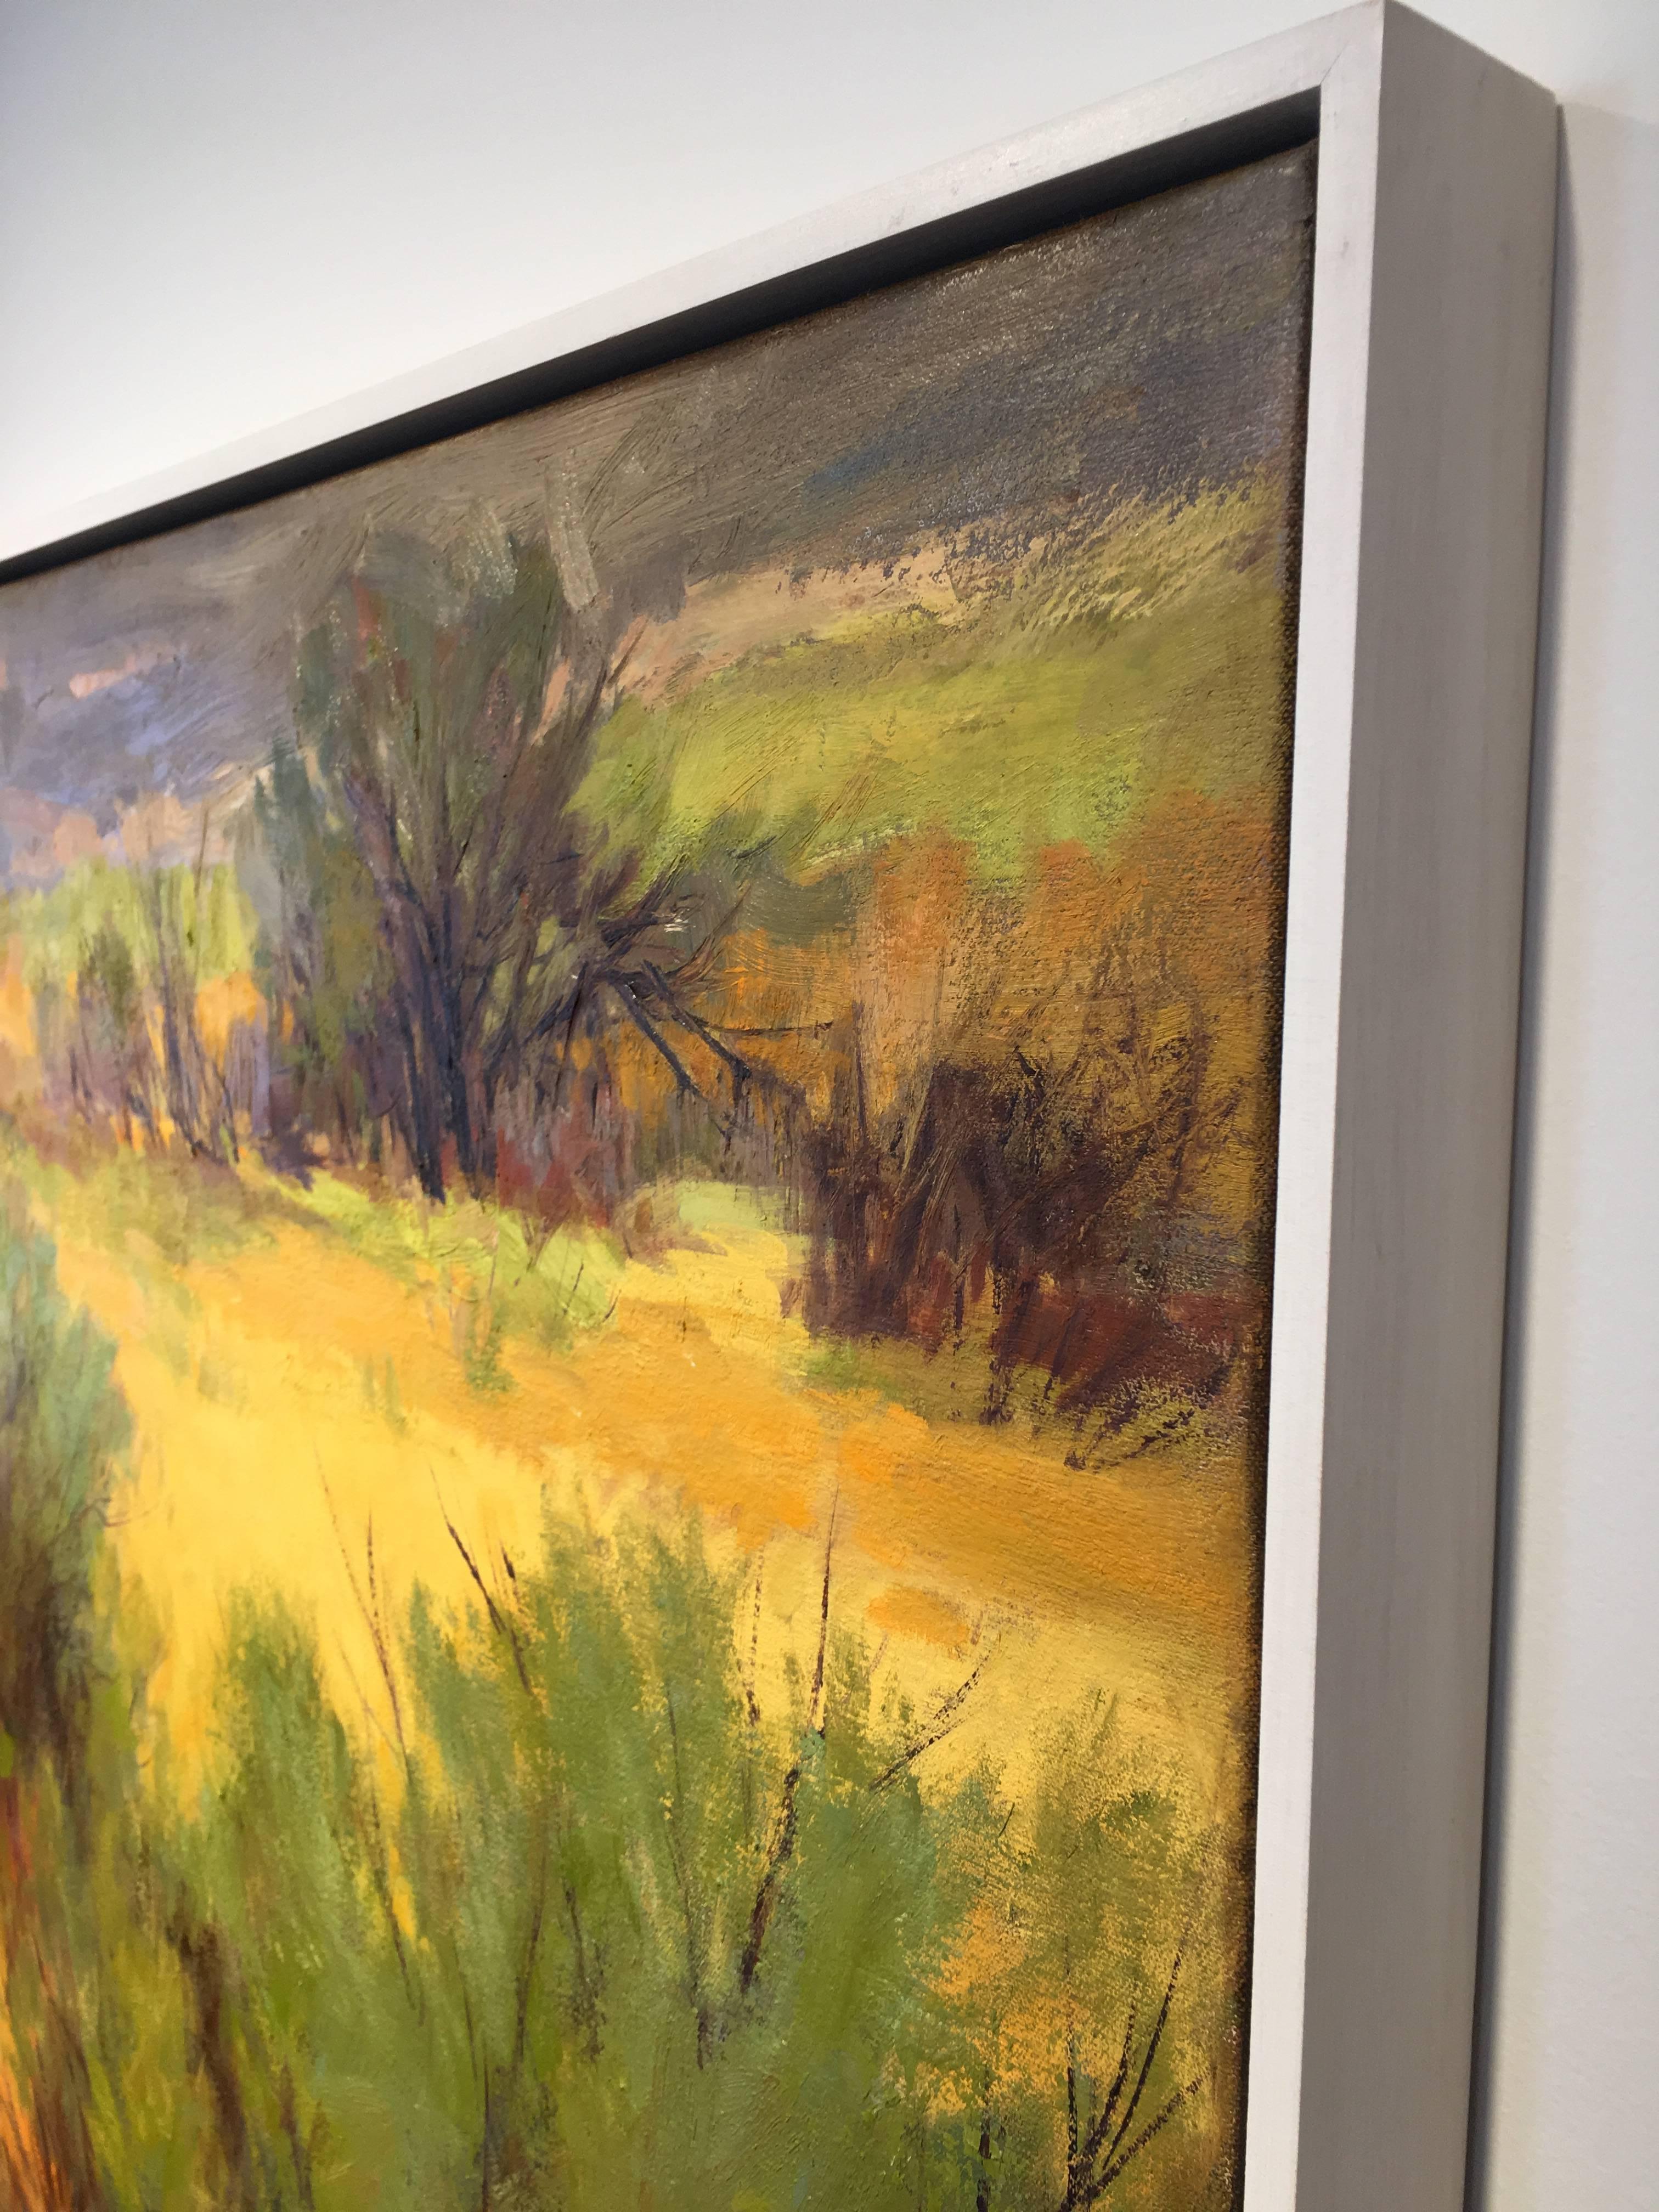 Taos Field
41 x 31" framed
oil on canvas

green yellow gold orange

MARTHA MANS
 
A master realist painter, she was born in Pittsburgh, Pennsylvania where she attended Carlow University and received a degree in art and art education.  Later she